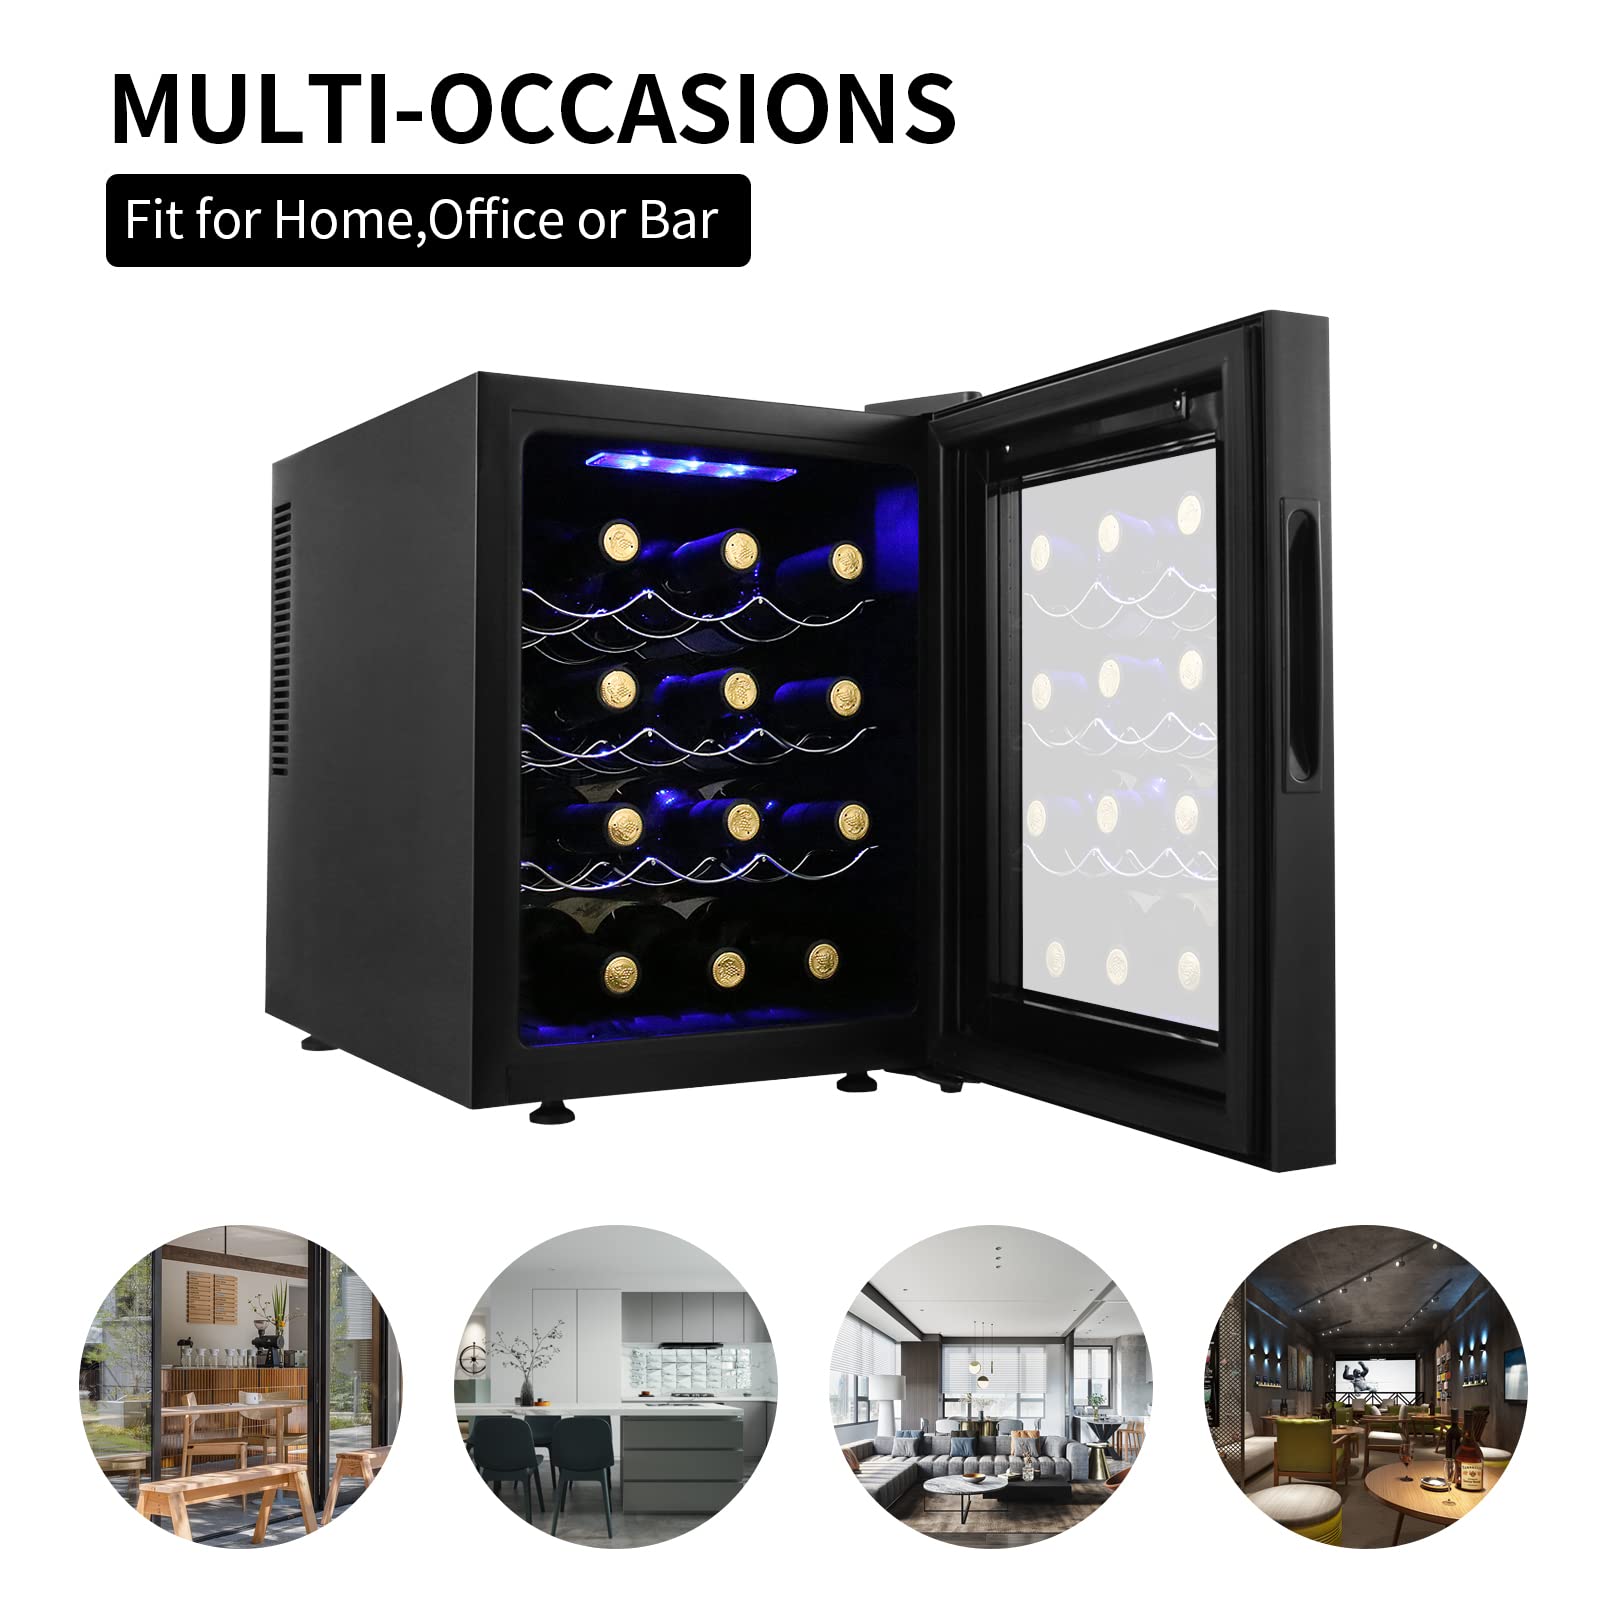 12 Bottle Wine Cooler Refrigerator, Compact Mini Wine Fridge with Digital Temperature Control Quiet Operation Thermoelectric Chiller, Freestanding Wine Cellar for Red, White, Champagne